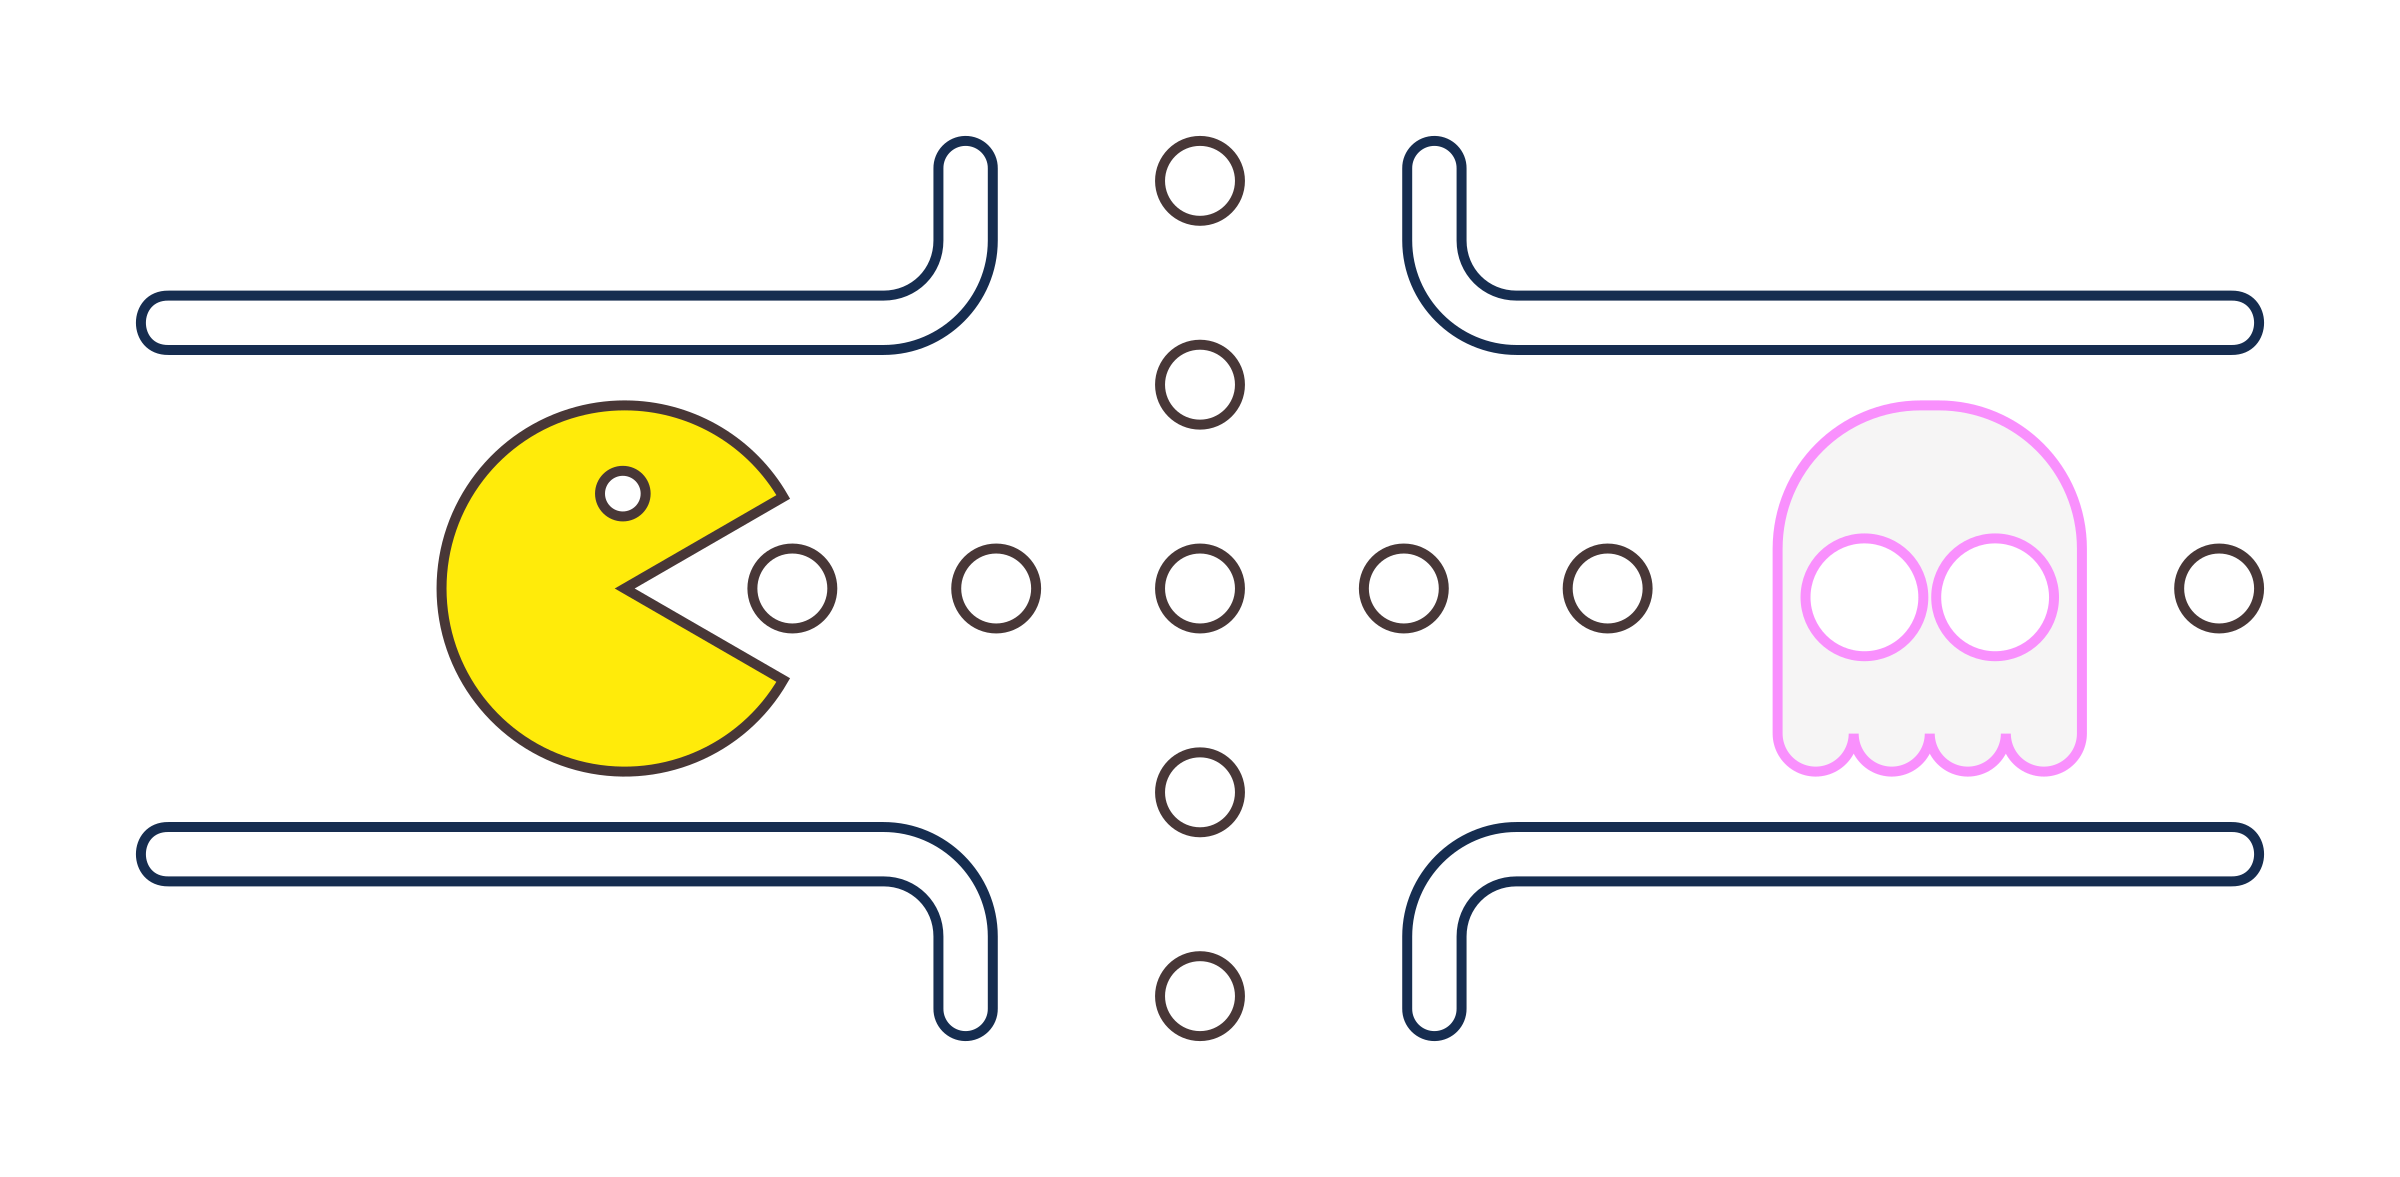 ghost clipart pac man